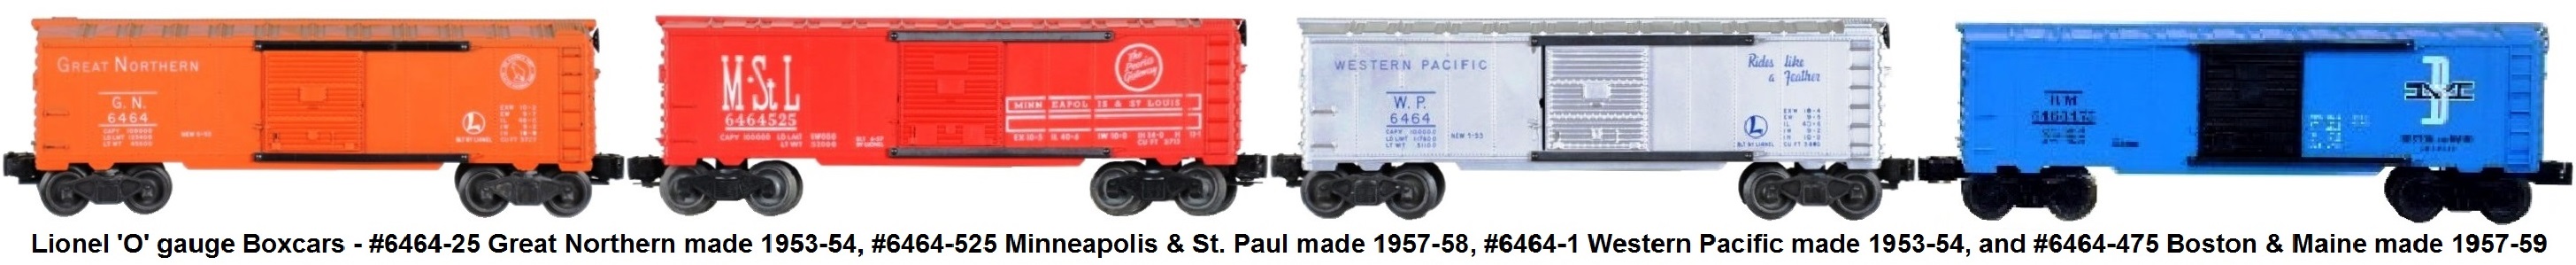 Lionel 6464 series box cars from the post-war era - #6464-25 GN, type I, #6464-525 M&StL type IIB, #6464-1 WP type I, #6464-475 Boston & Maine